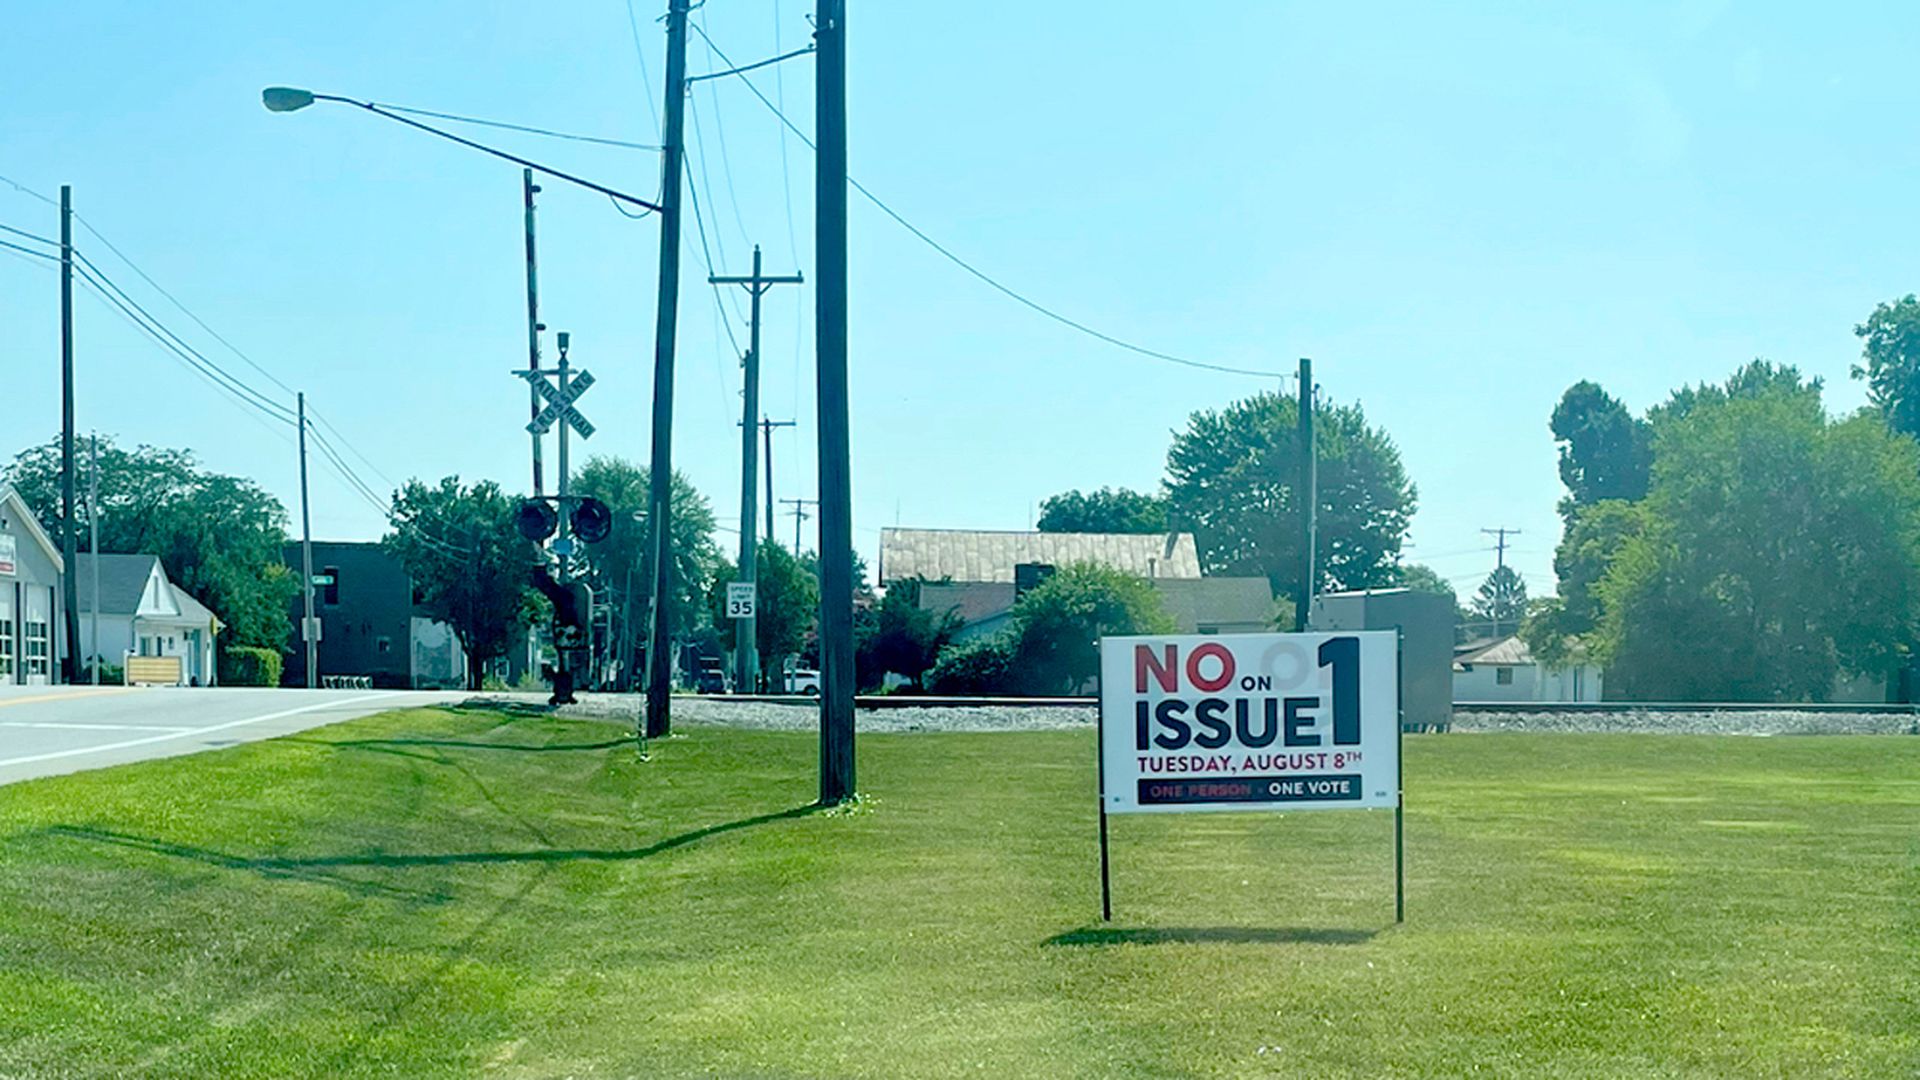 A vote No on Issue 1 sign on a grassy plot in rural Ohio